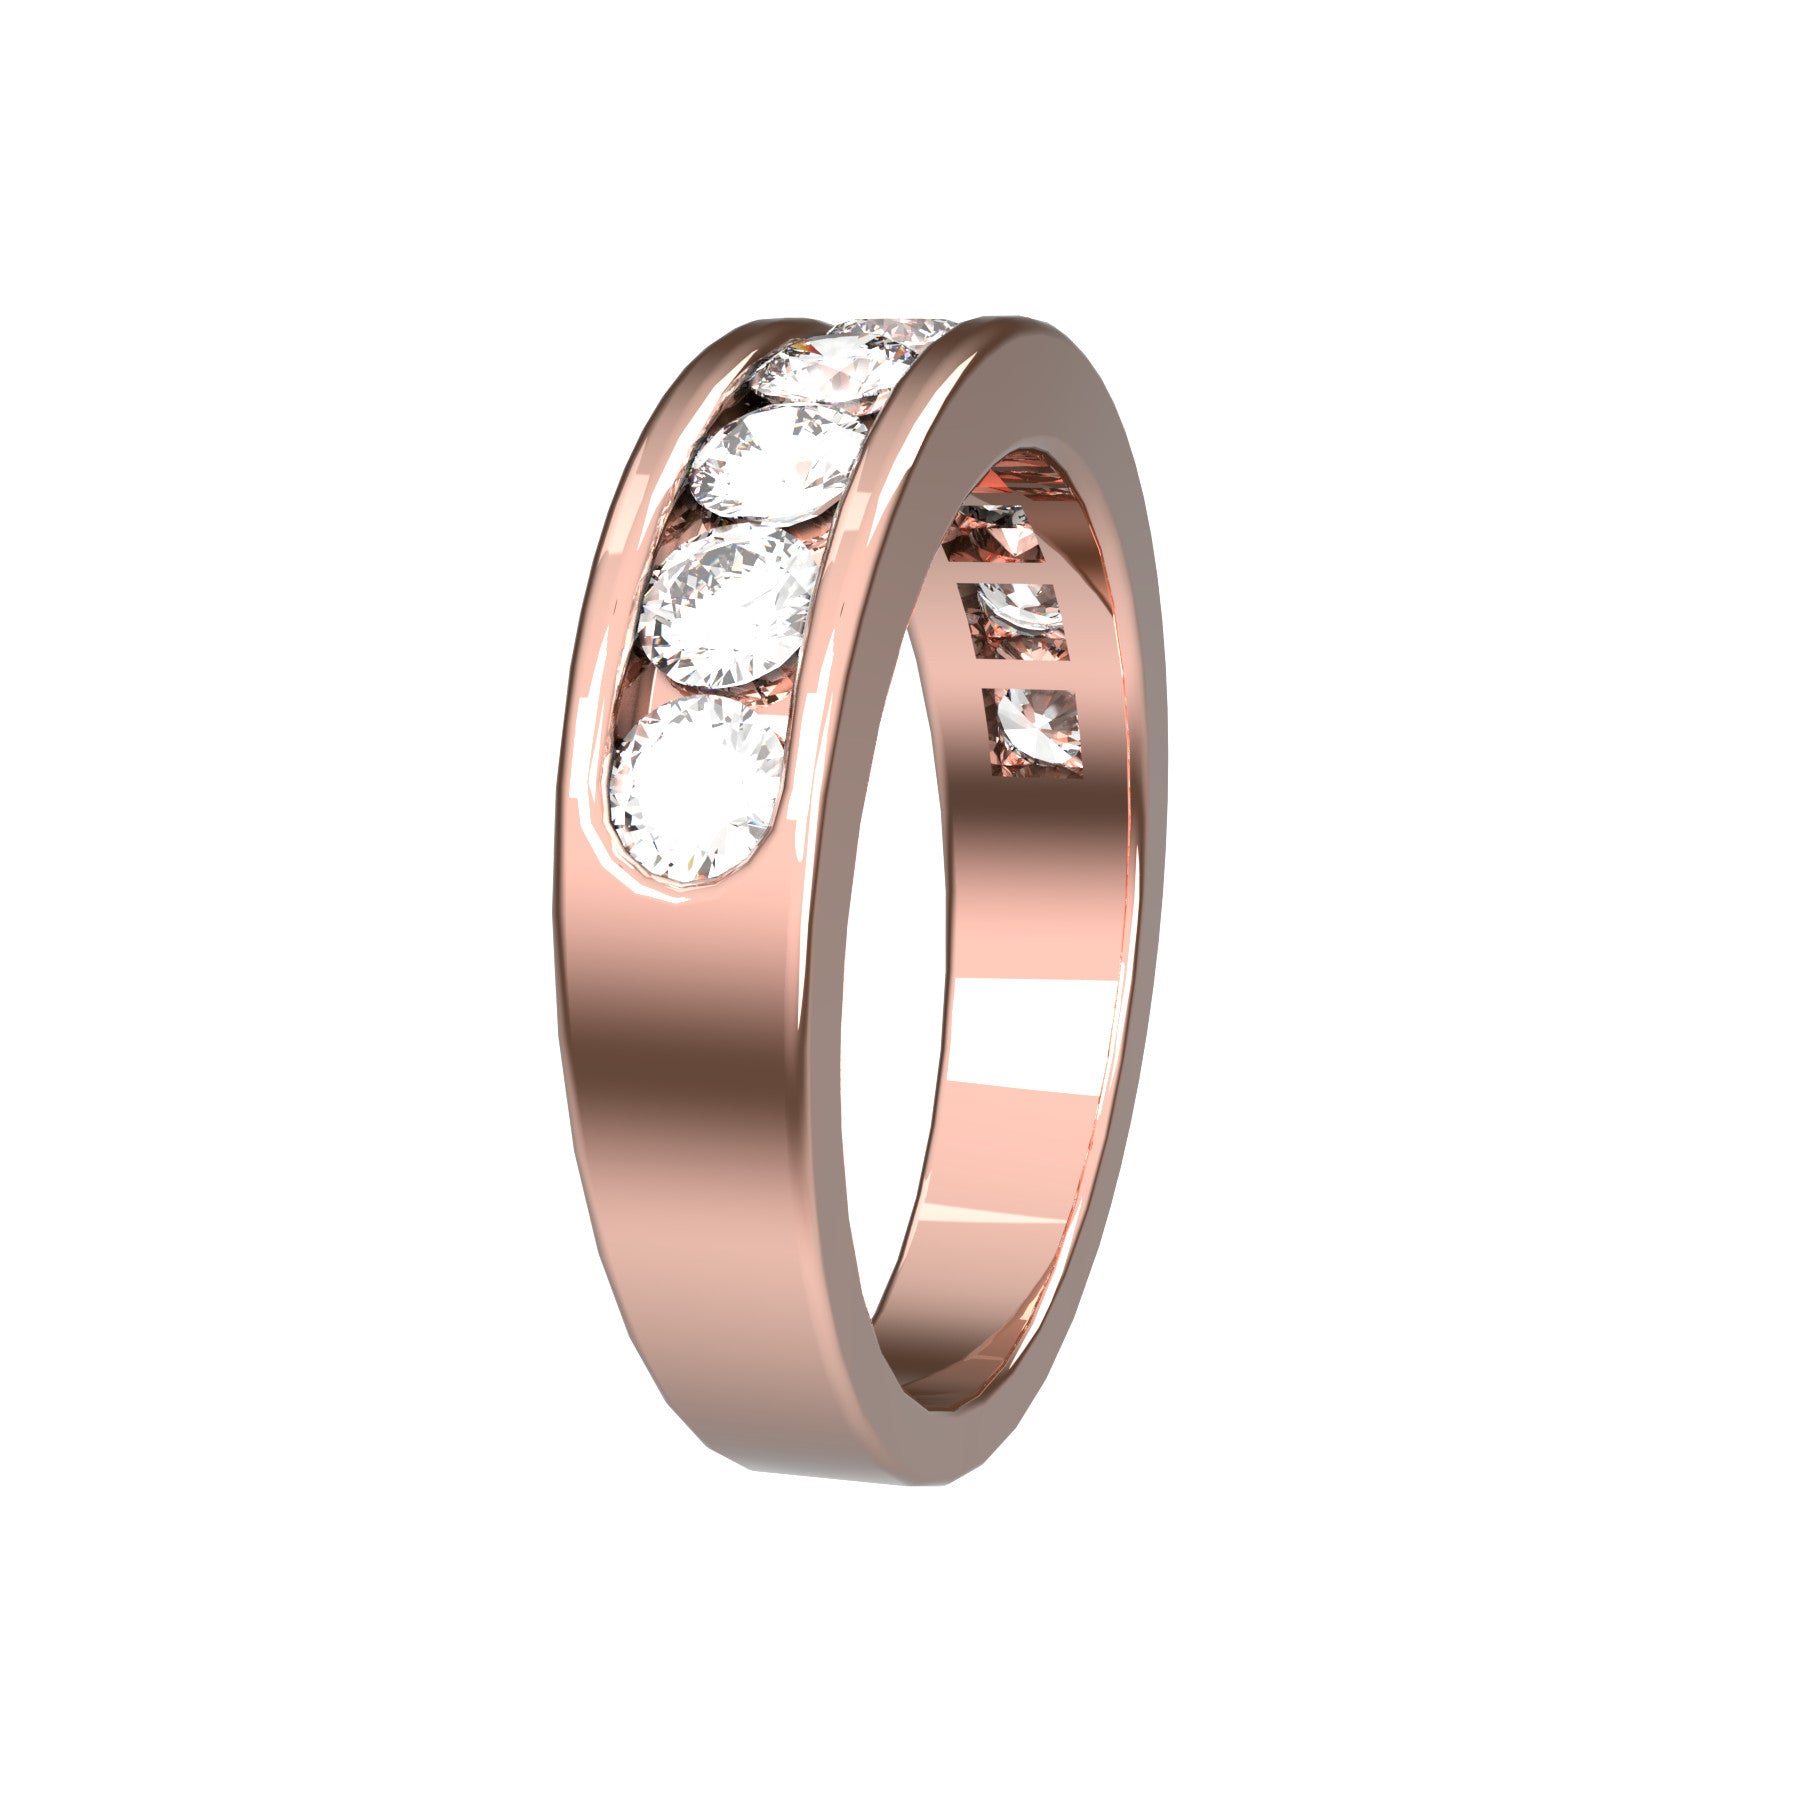 perpetual half wedding ring , 18 K pink gold, 0,10 ct round natural diamond, weight about 5,3 g. (0.18 oz), width 5,20 mm